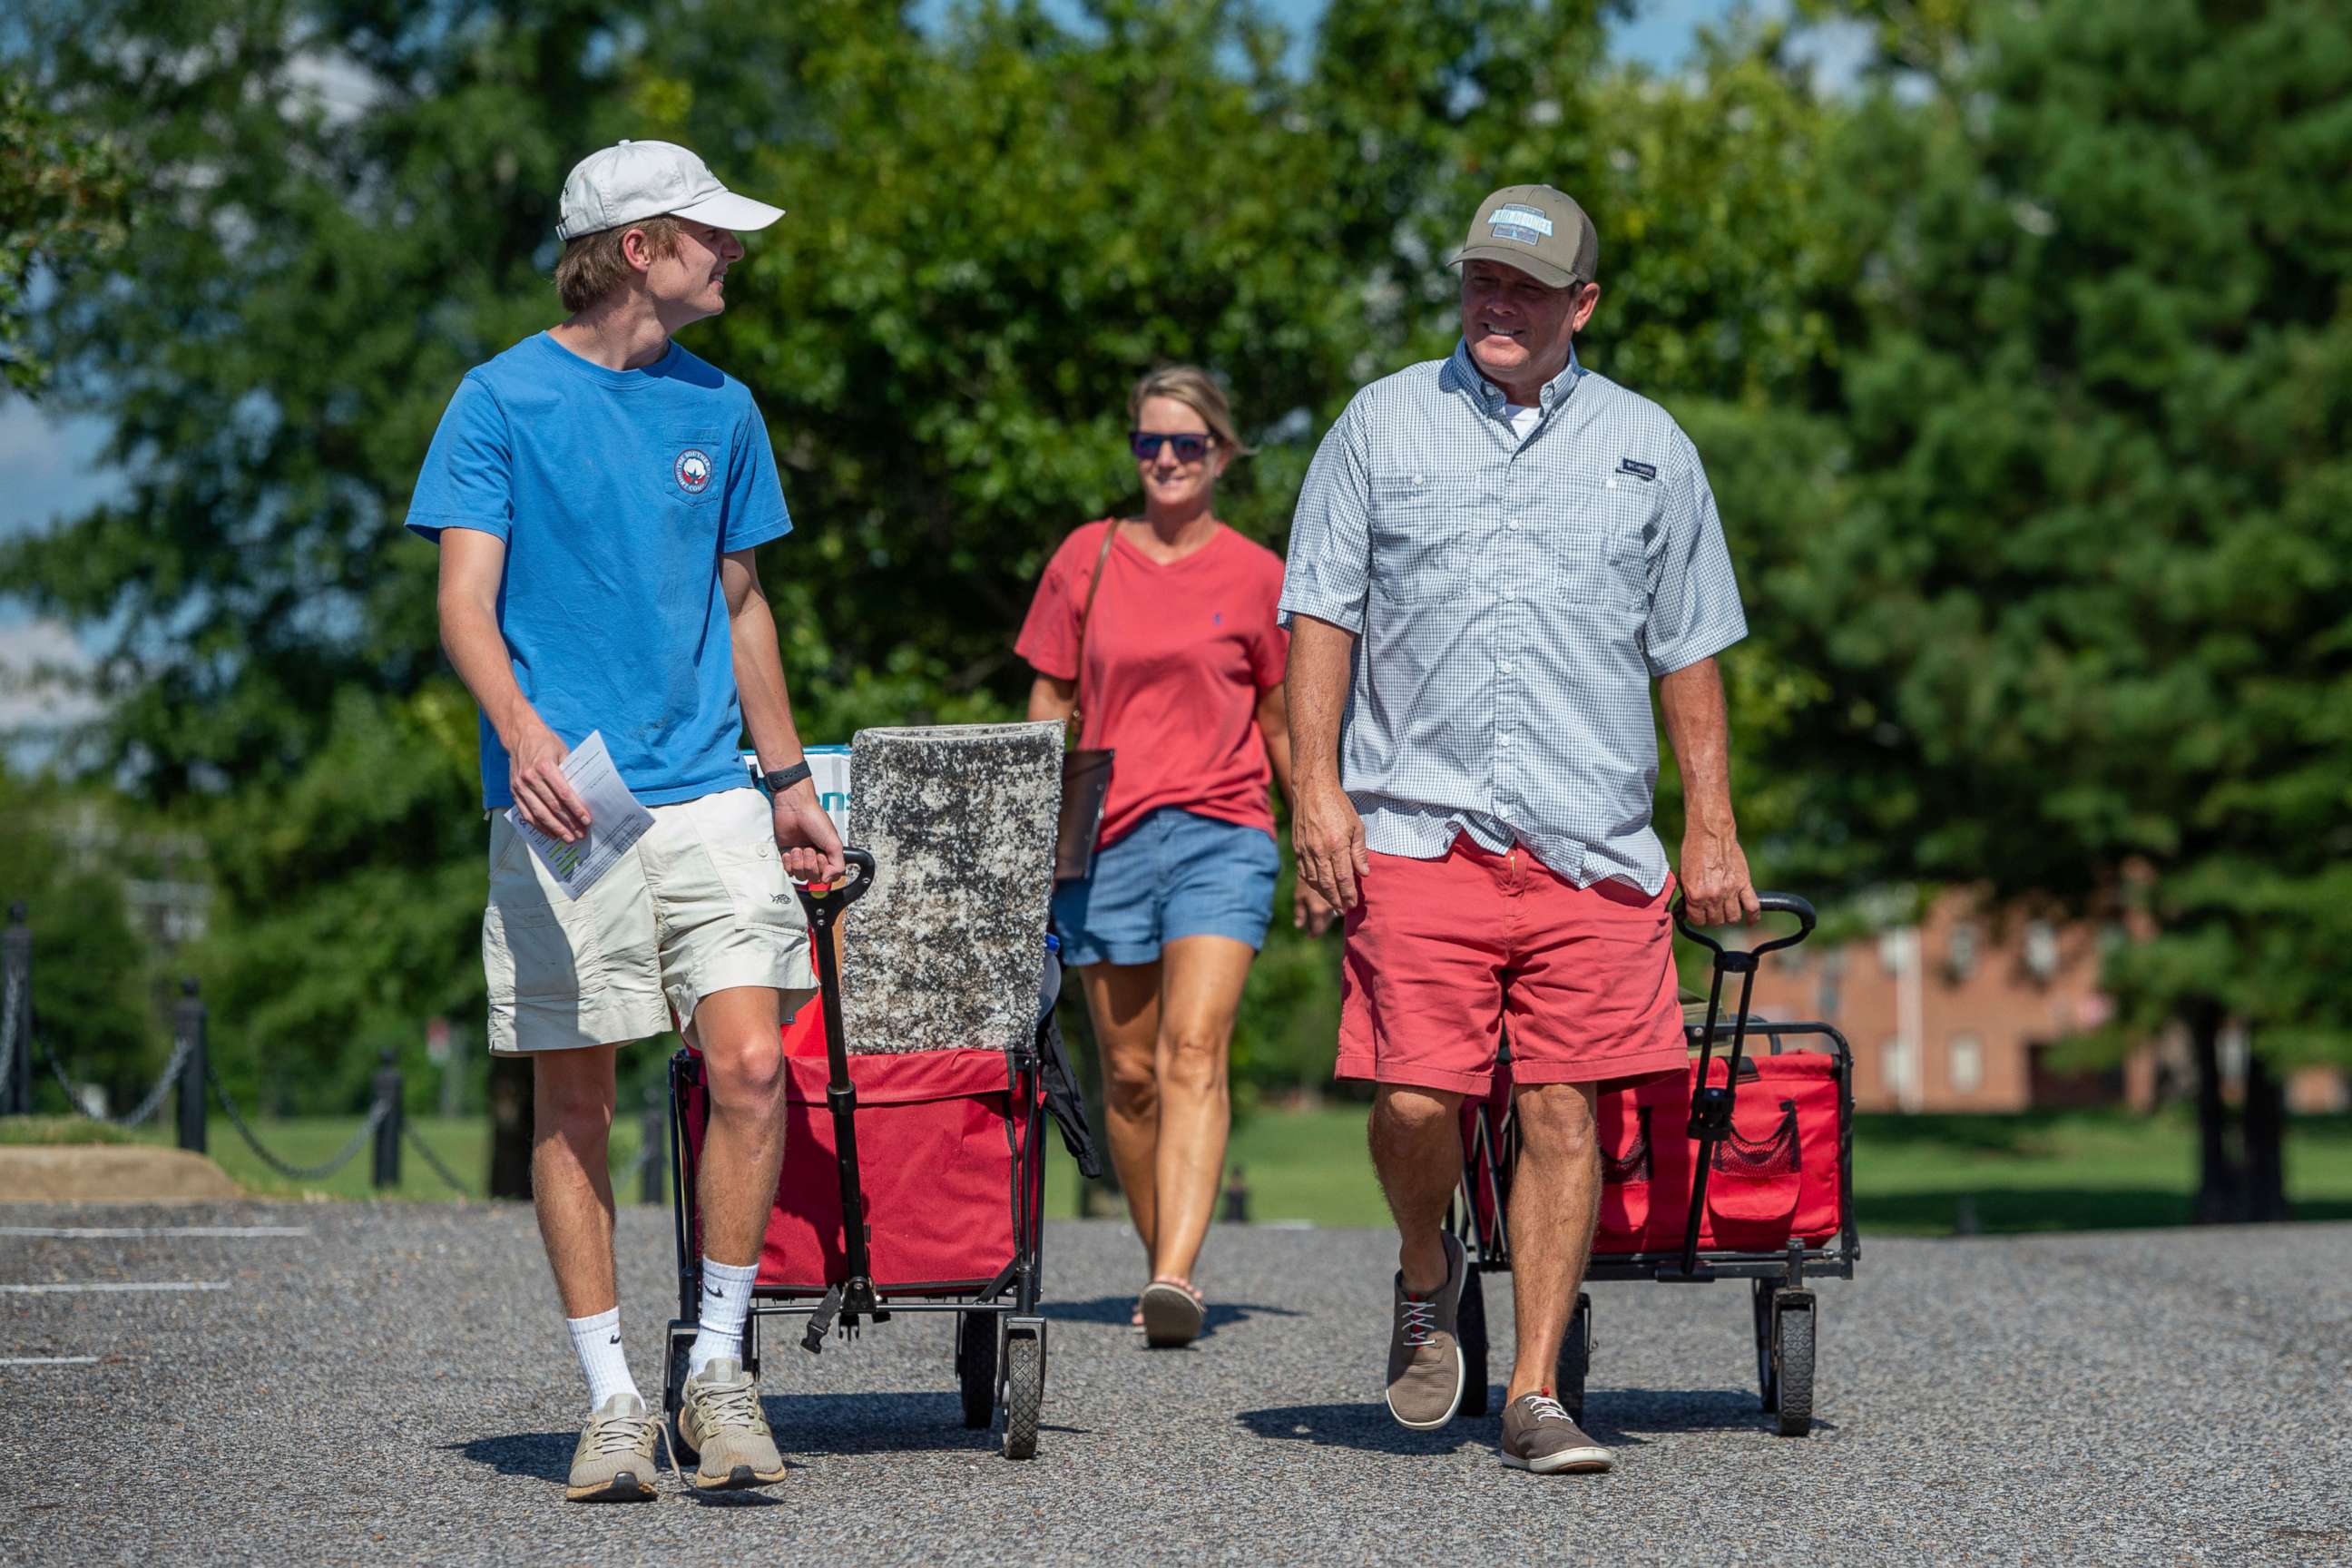 PHOTO: Baylor Garland, left, arrives to move in for his freshman year, assisted by his father Alan, right and mother, Teena, after they traveled from Eaton, Ga., at the University of Alabama campus on Aug. 15, 2020, in Tuscaloosa, Ala.